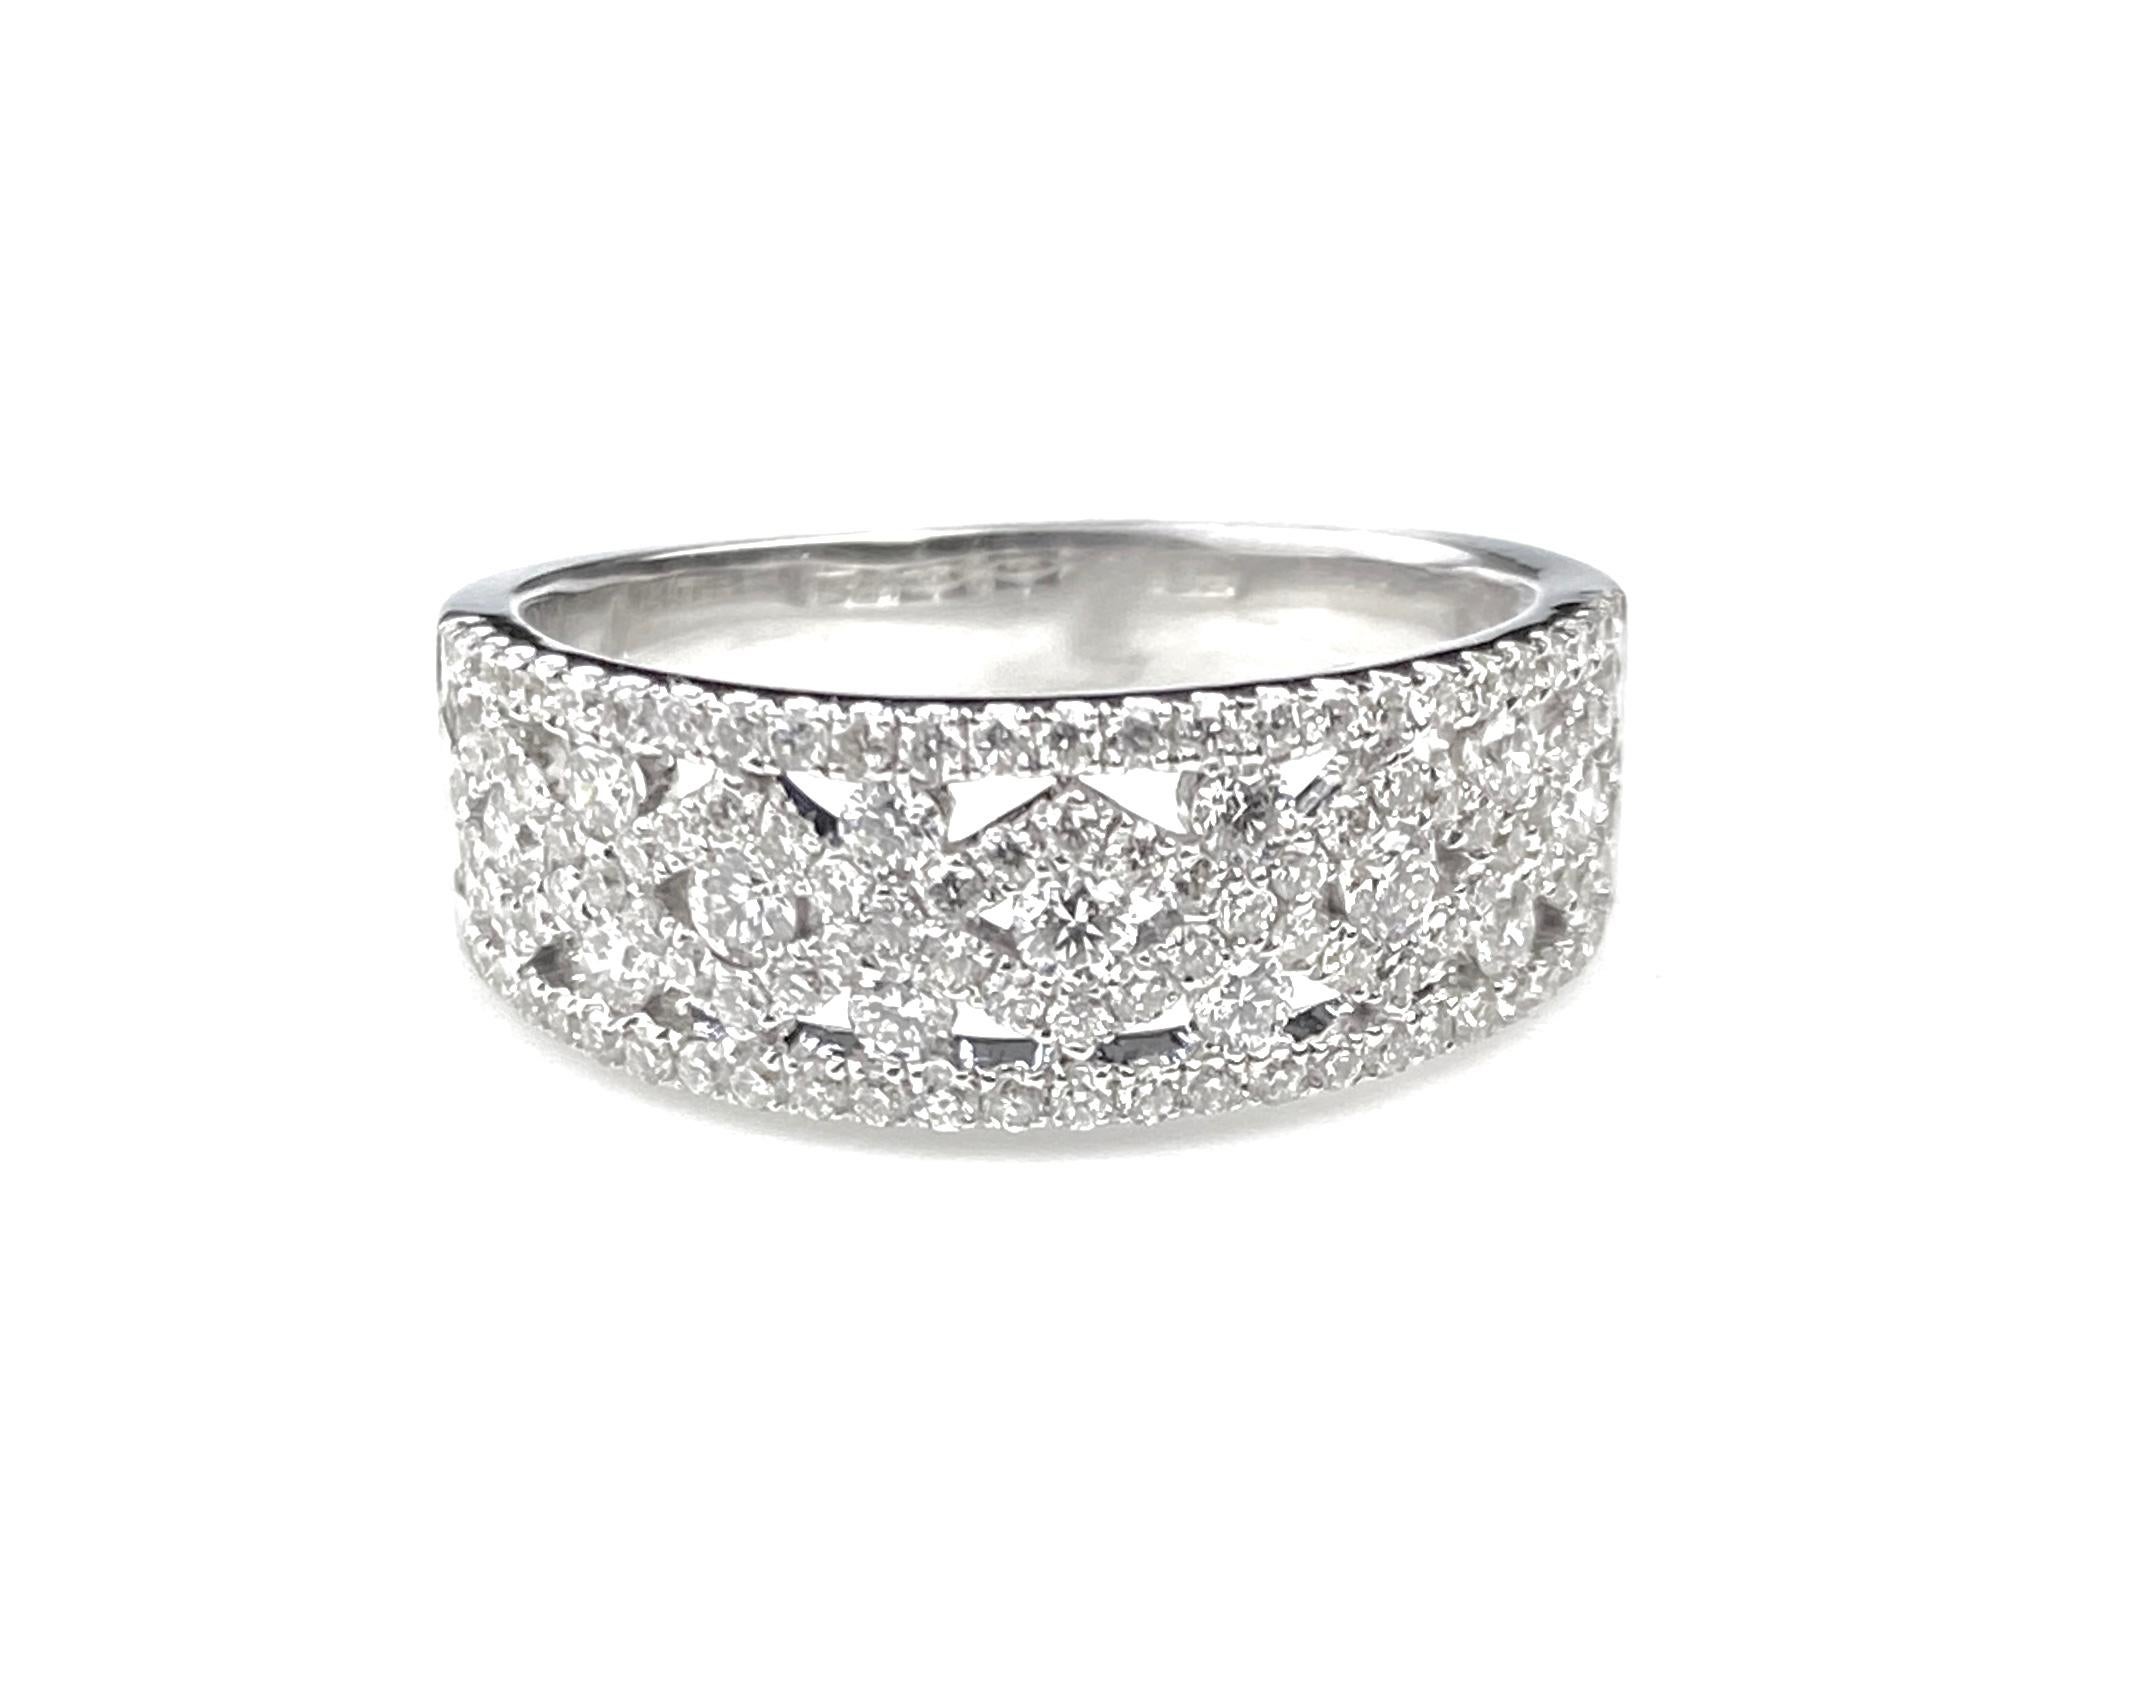 Ladies' right hand diamond ring with patterned design. Set half way around with 0.85ct total diamonds in 18kt white gold. Ring size 6 1/2. Complementary ring resizing up or down one ring size.